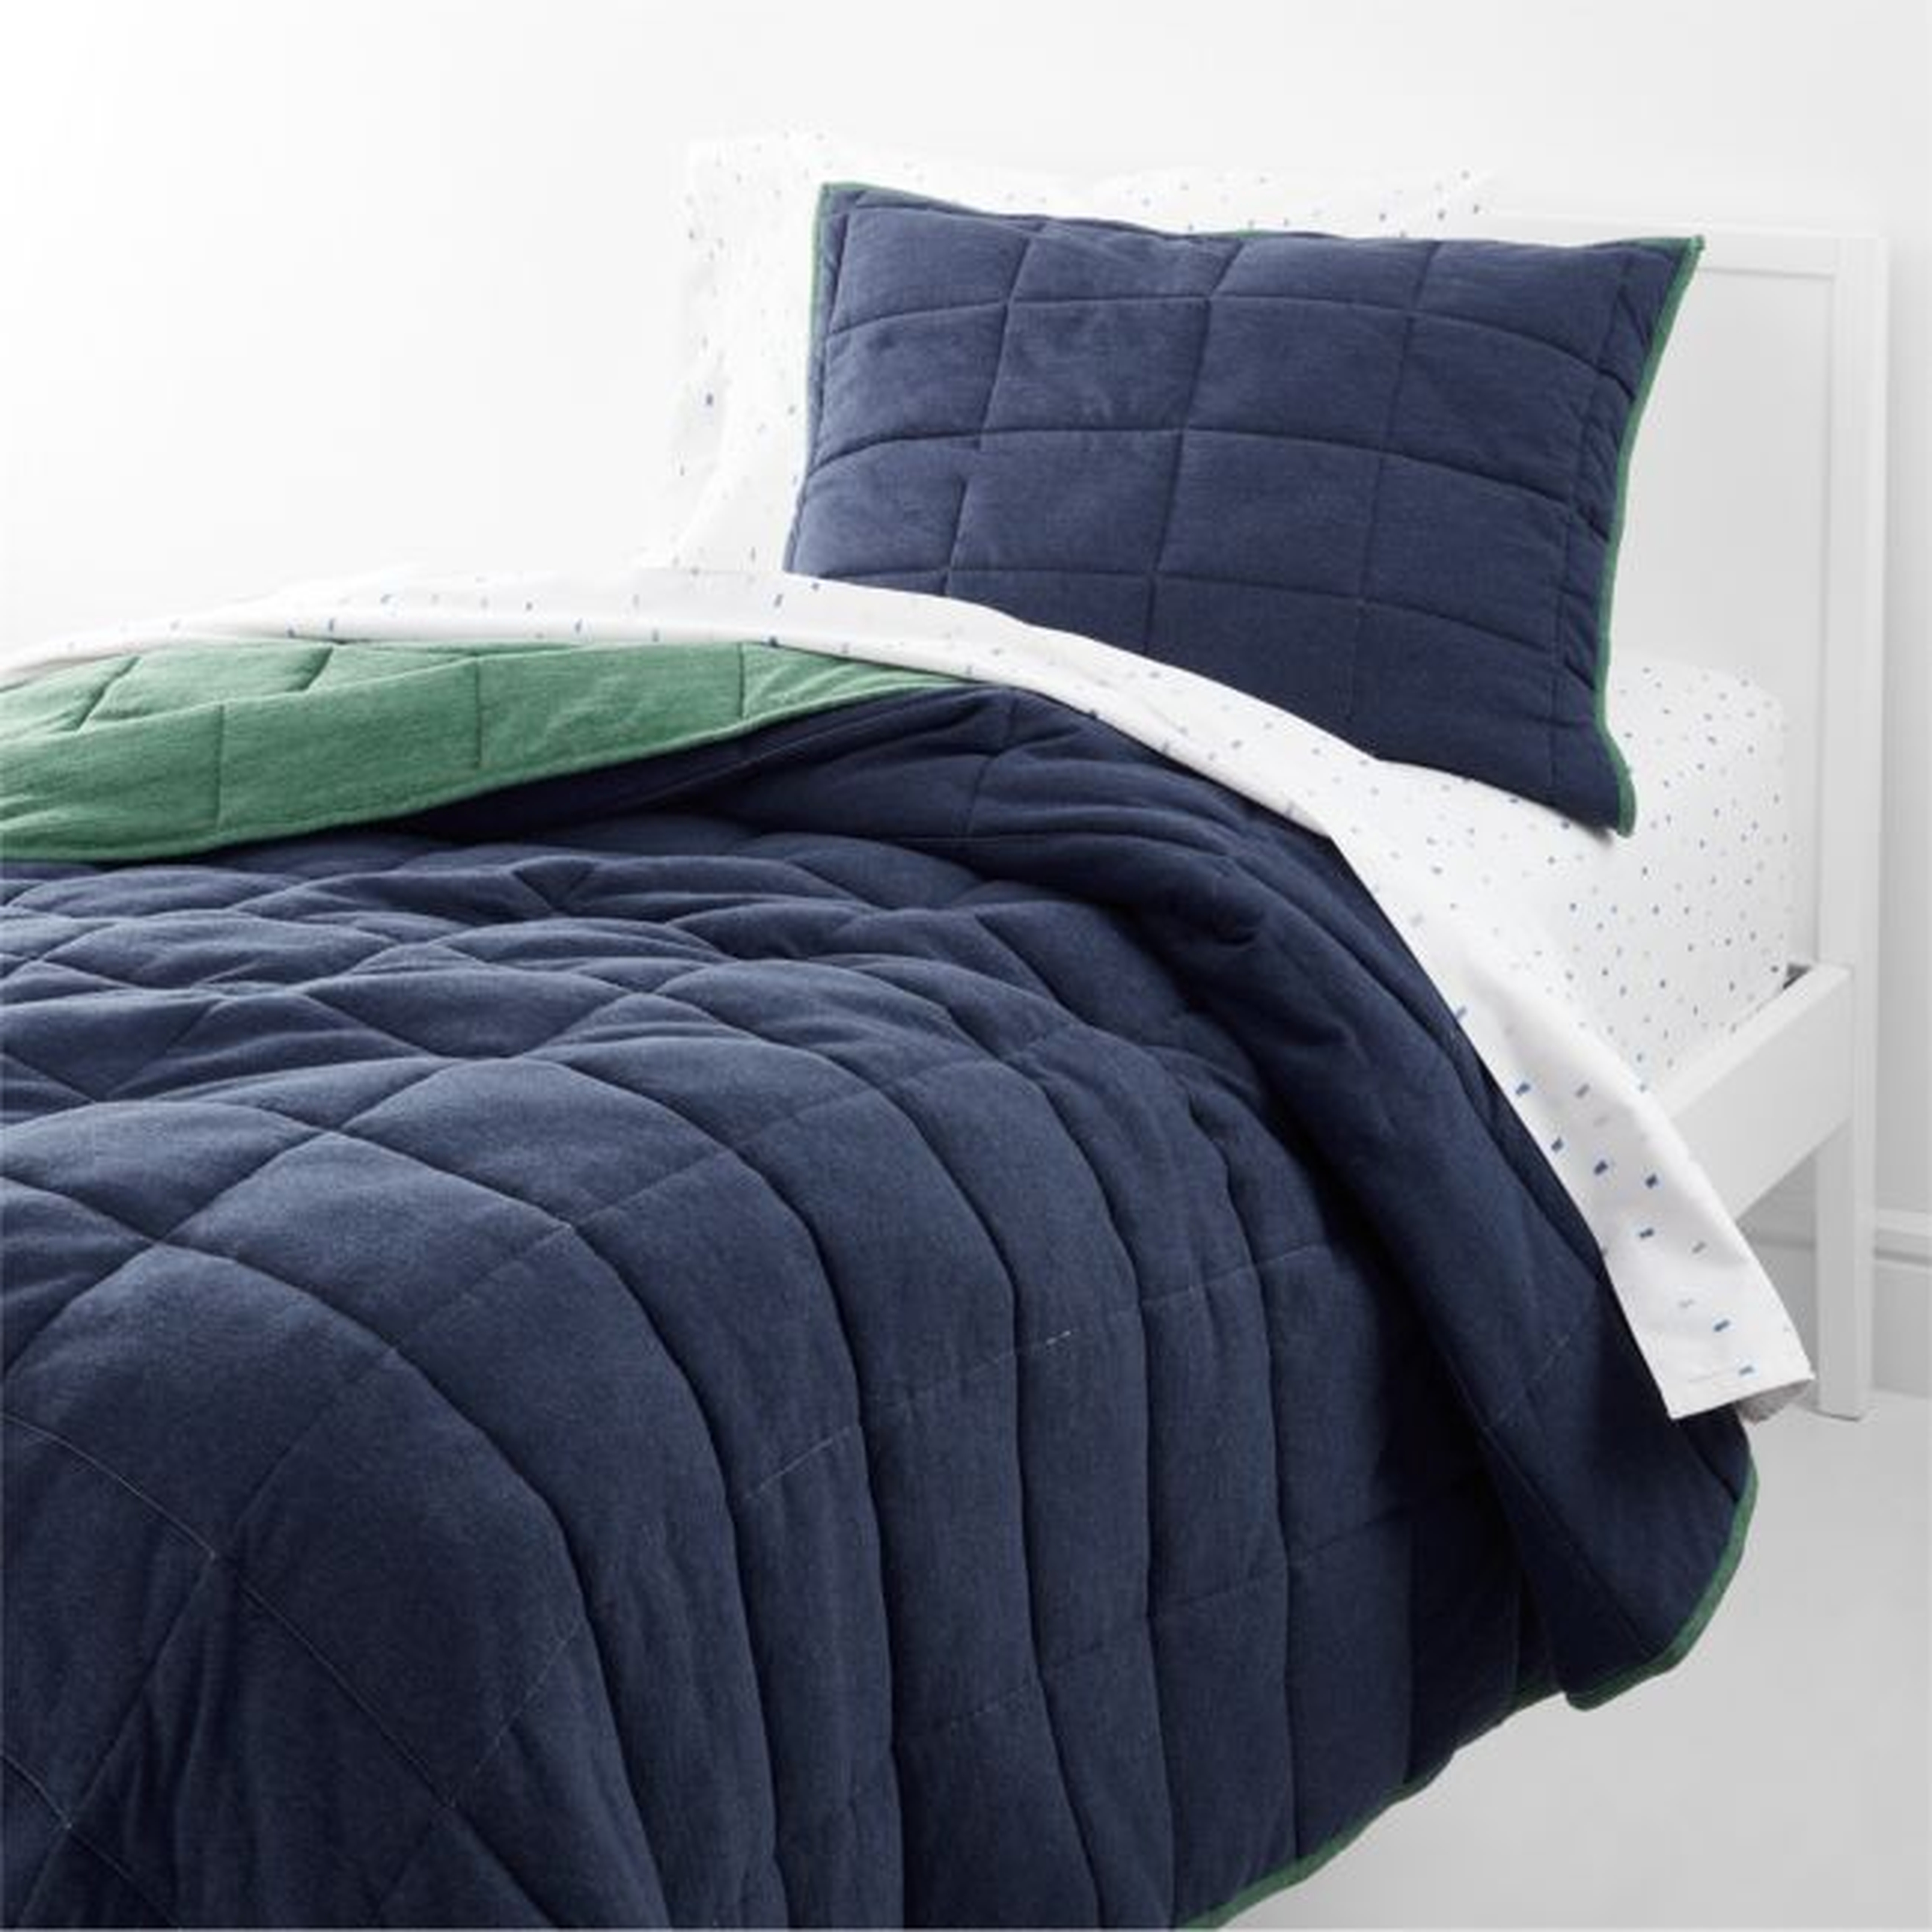 Full/Queen Heathered Jersey Reversible Navy Quilt - Crate and Barrel